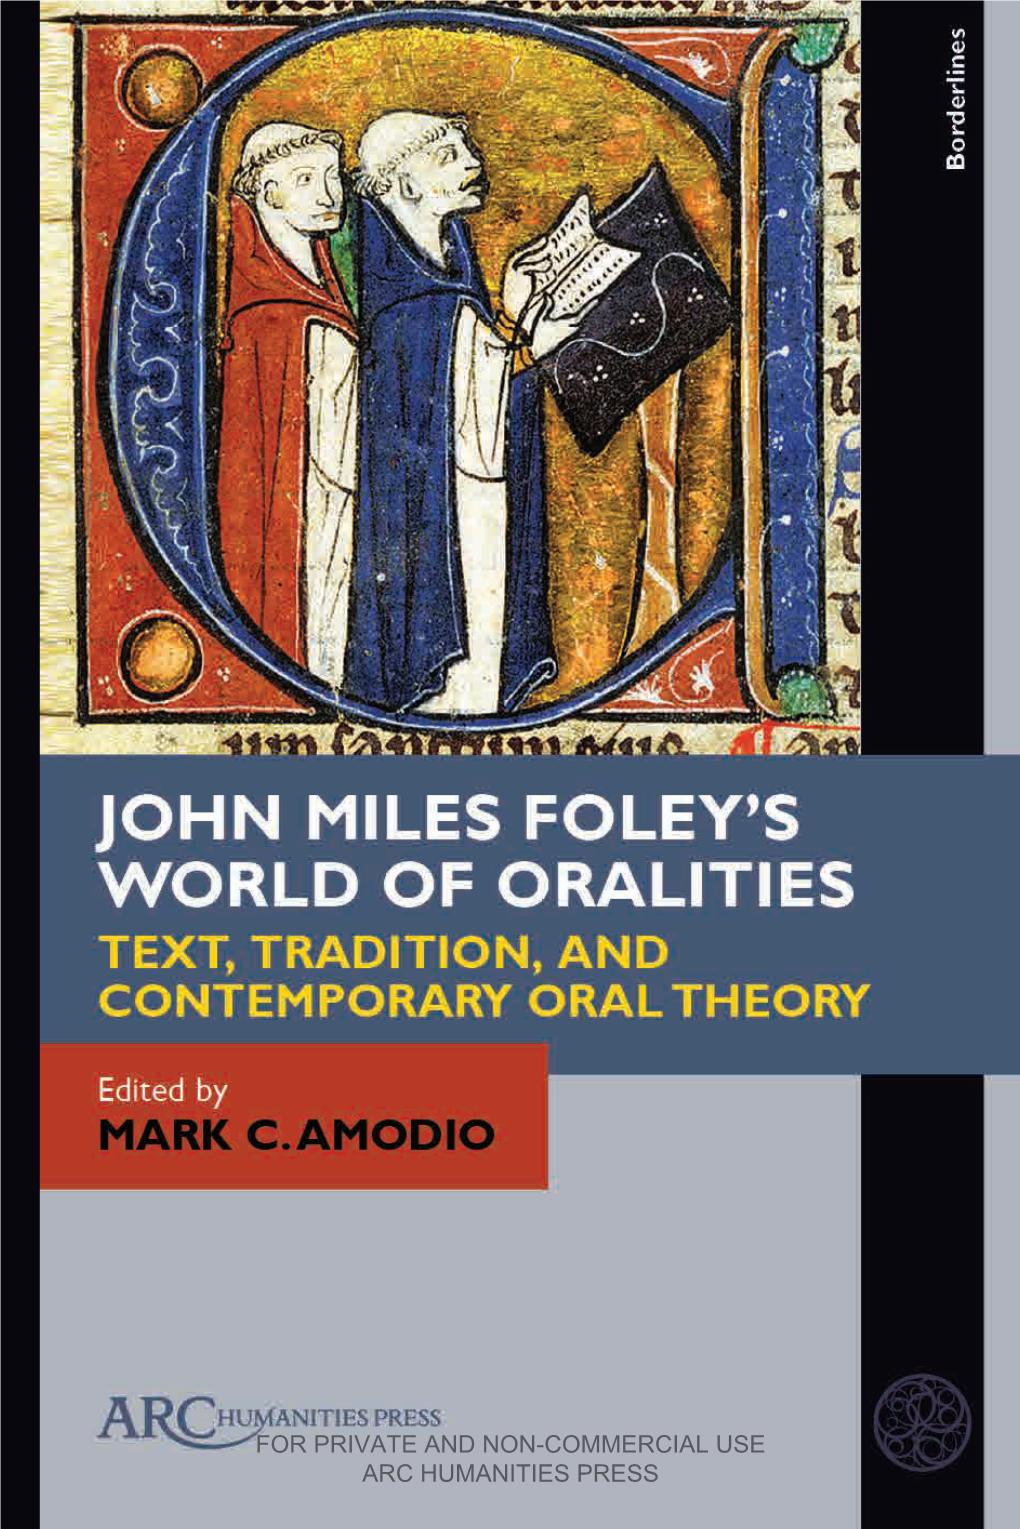 John Miles Foley's World of Oralities: Text, Tradition